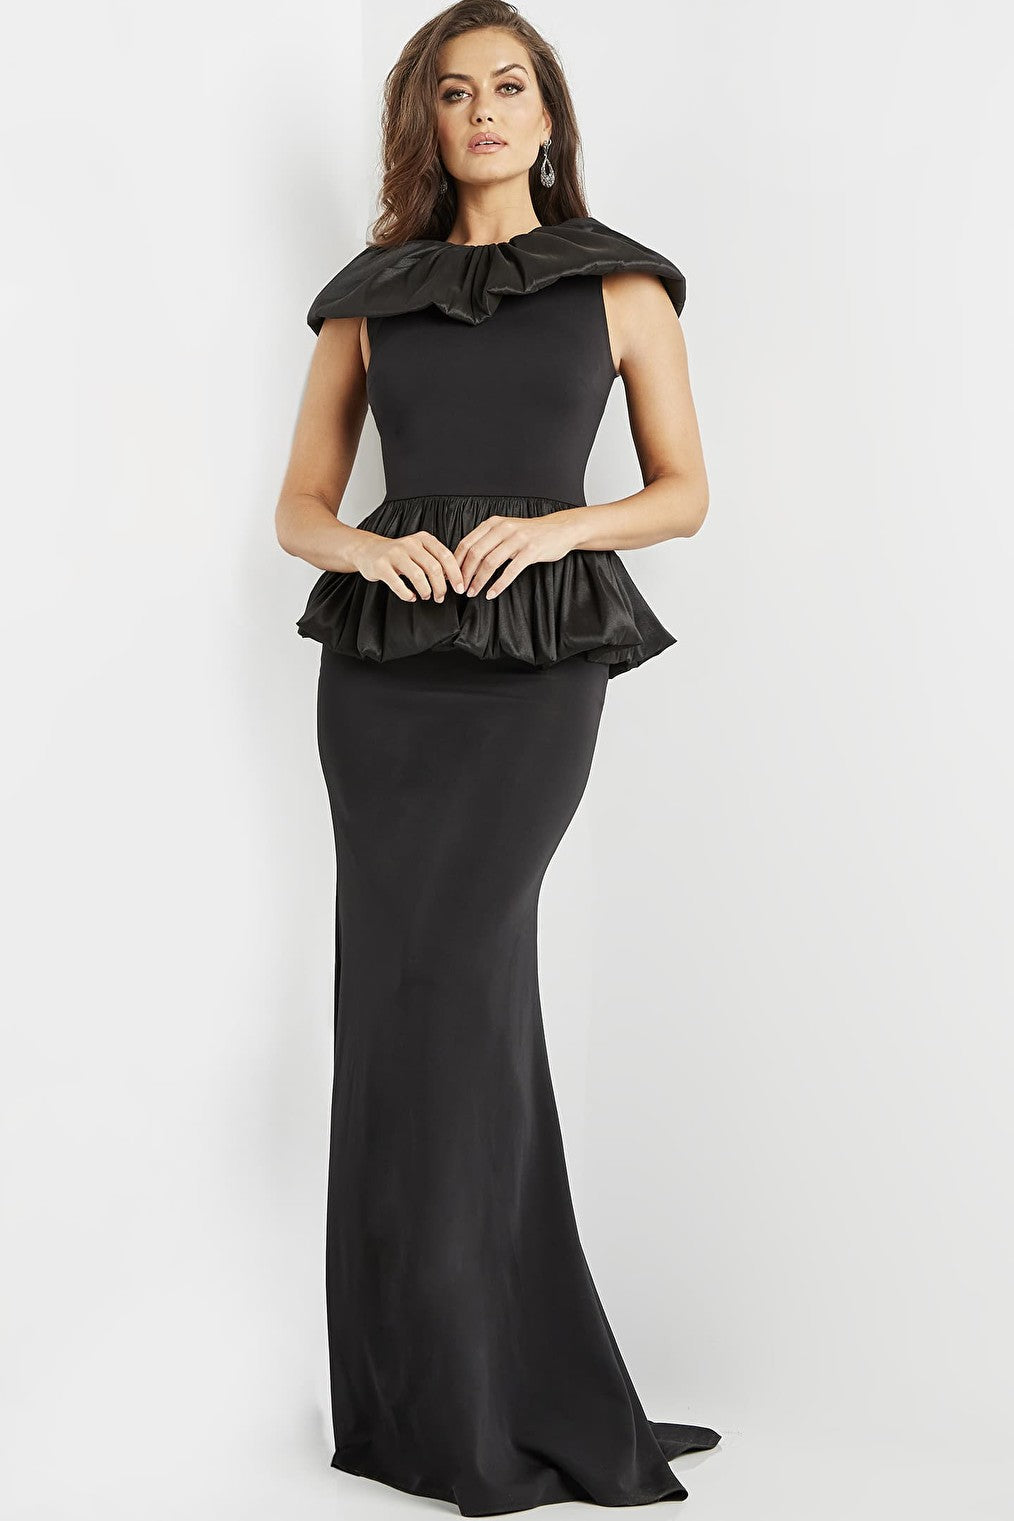 Black fitted evening gown 09997